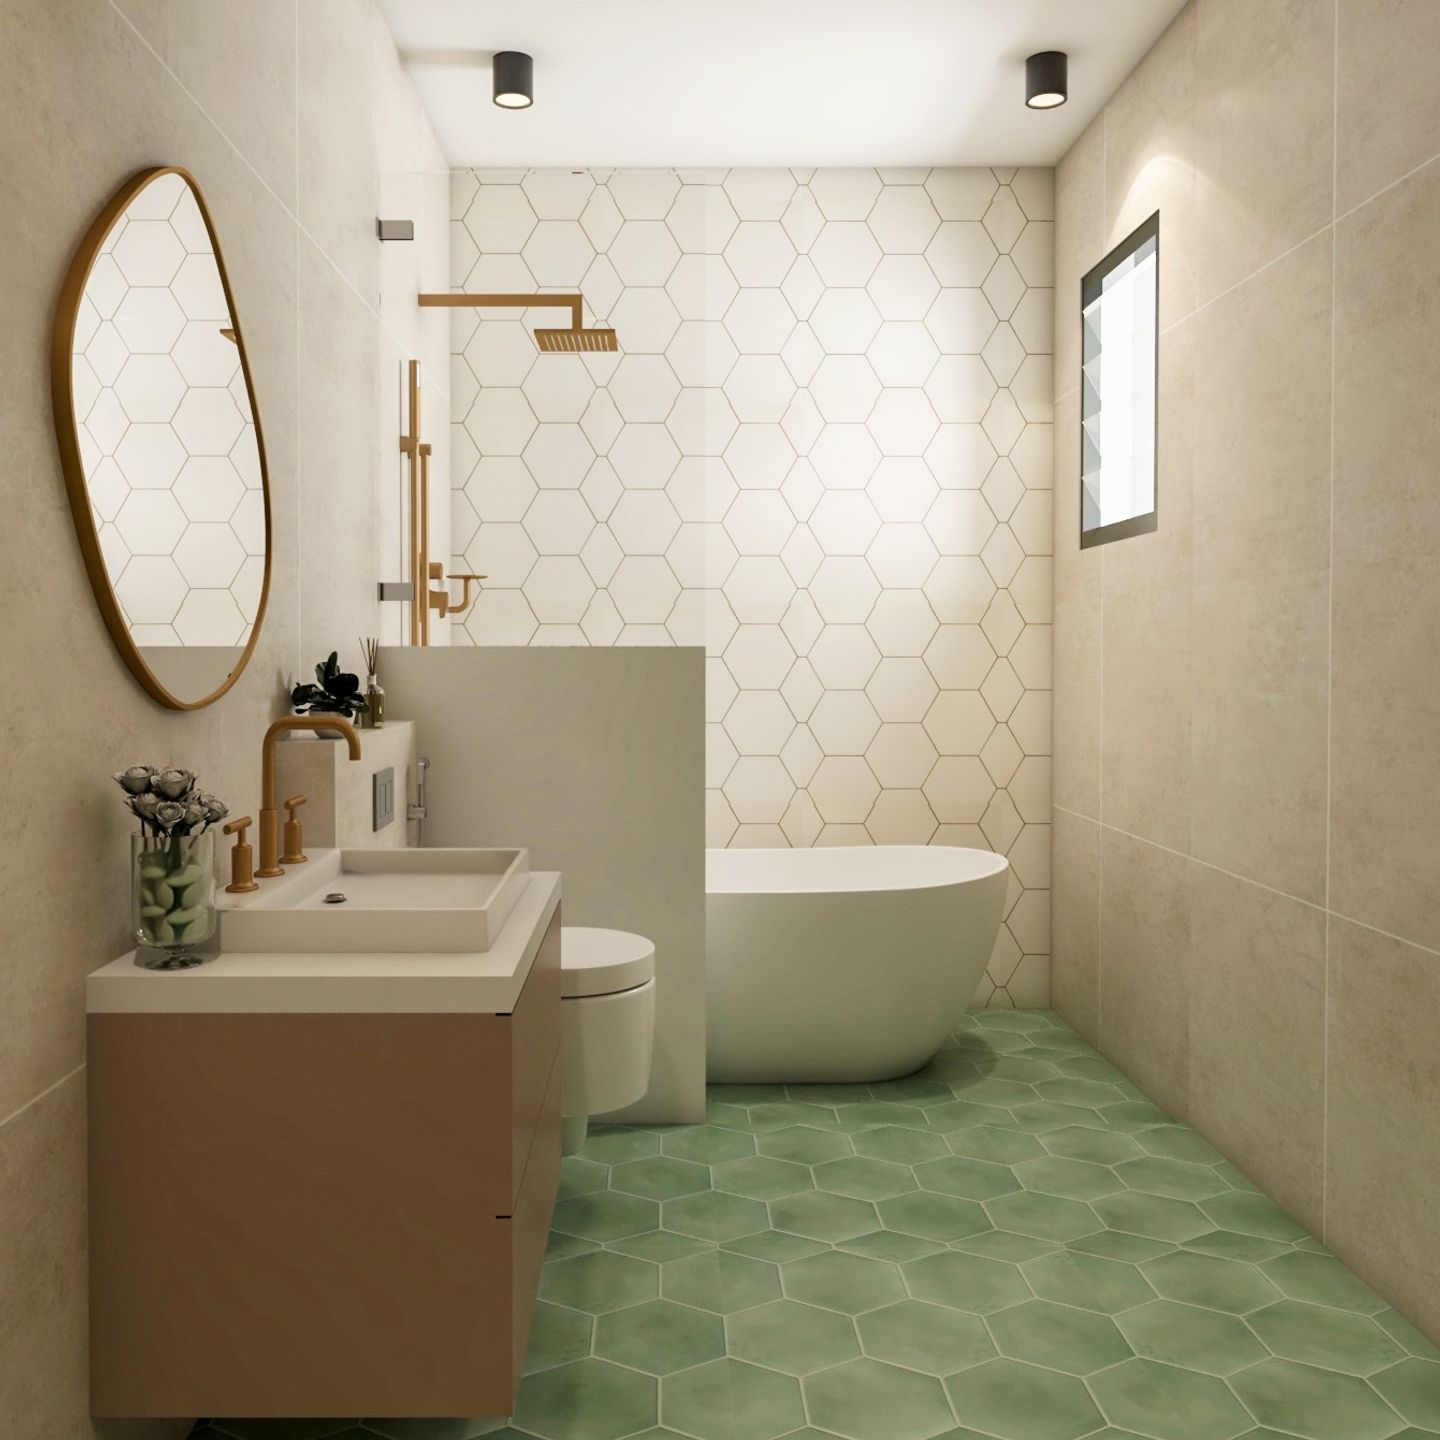 Green And White Small Bathroom Design With Hexagonal Tiles And Bathtub - Livspace